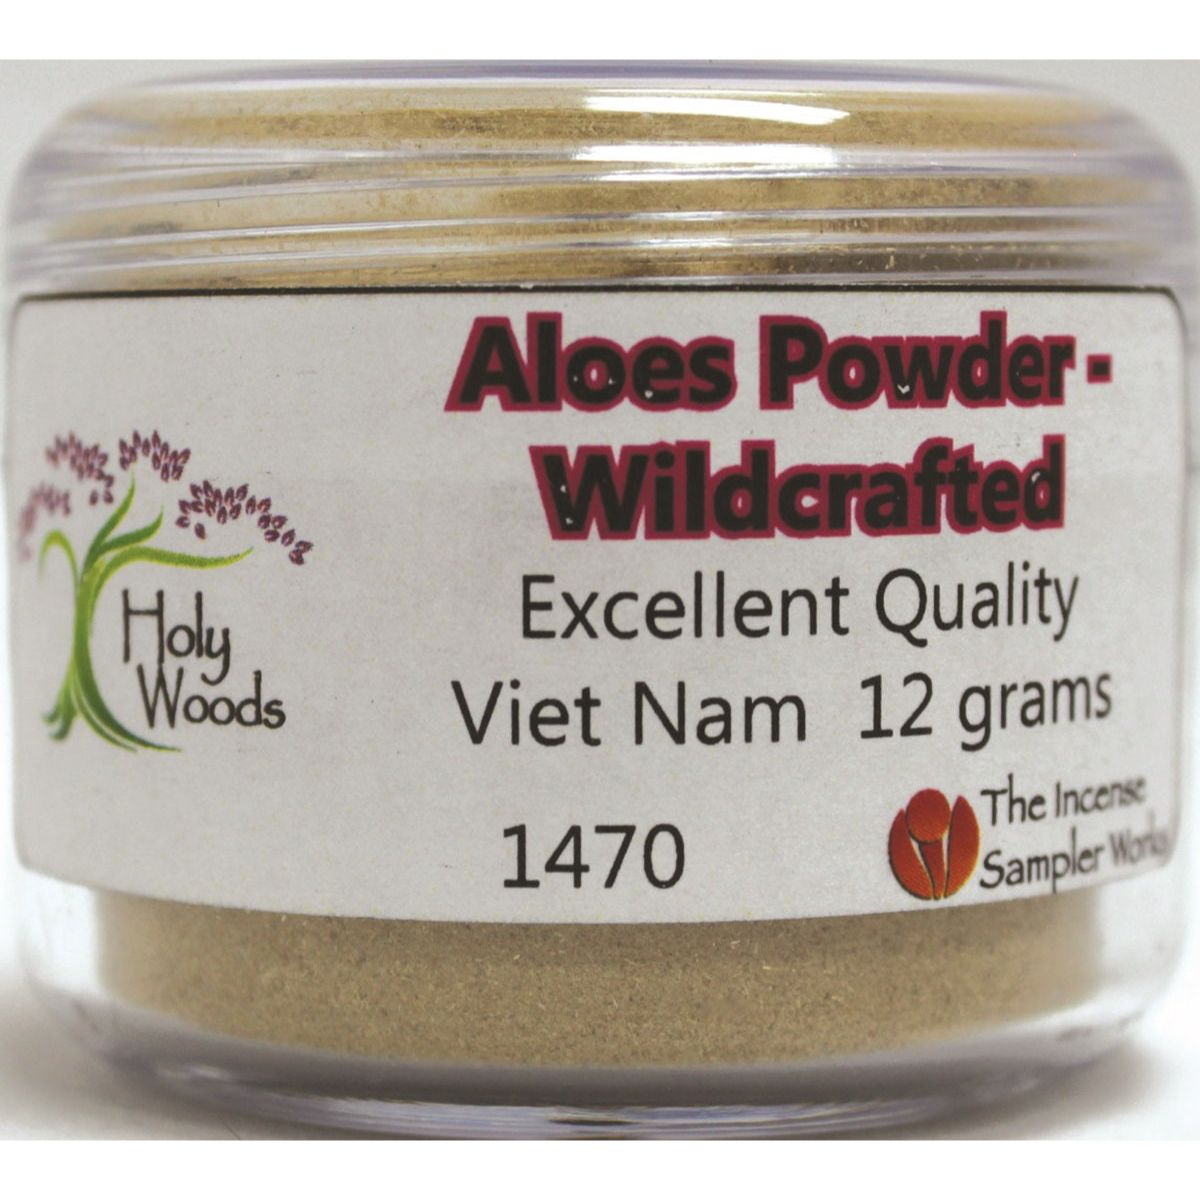 Holy Woods - Aloes Wood Powder, Wildcrafted